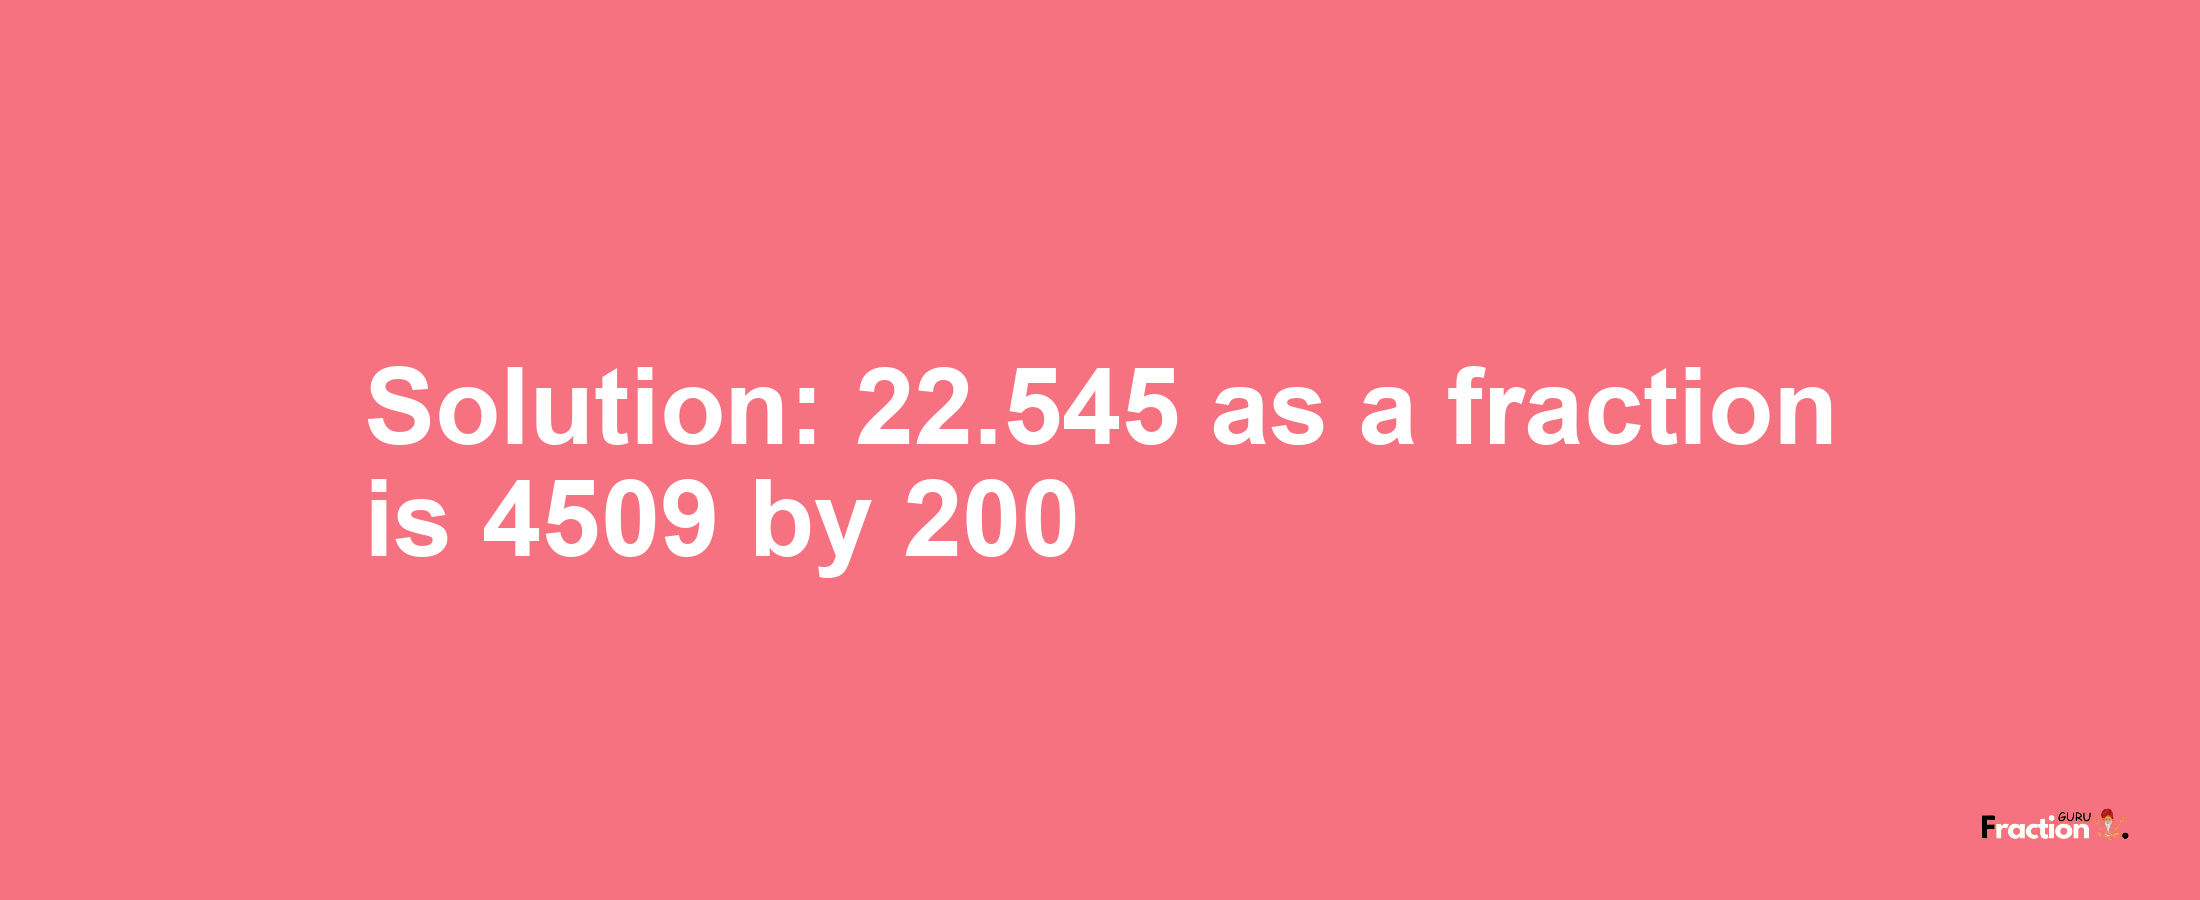 Solution:22.545 as a fraction is 4509/200